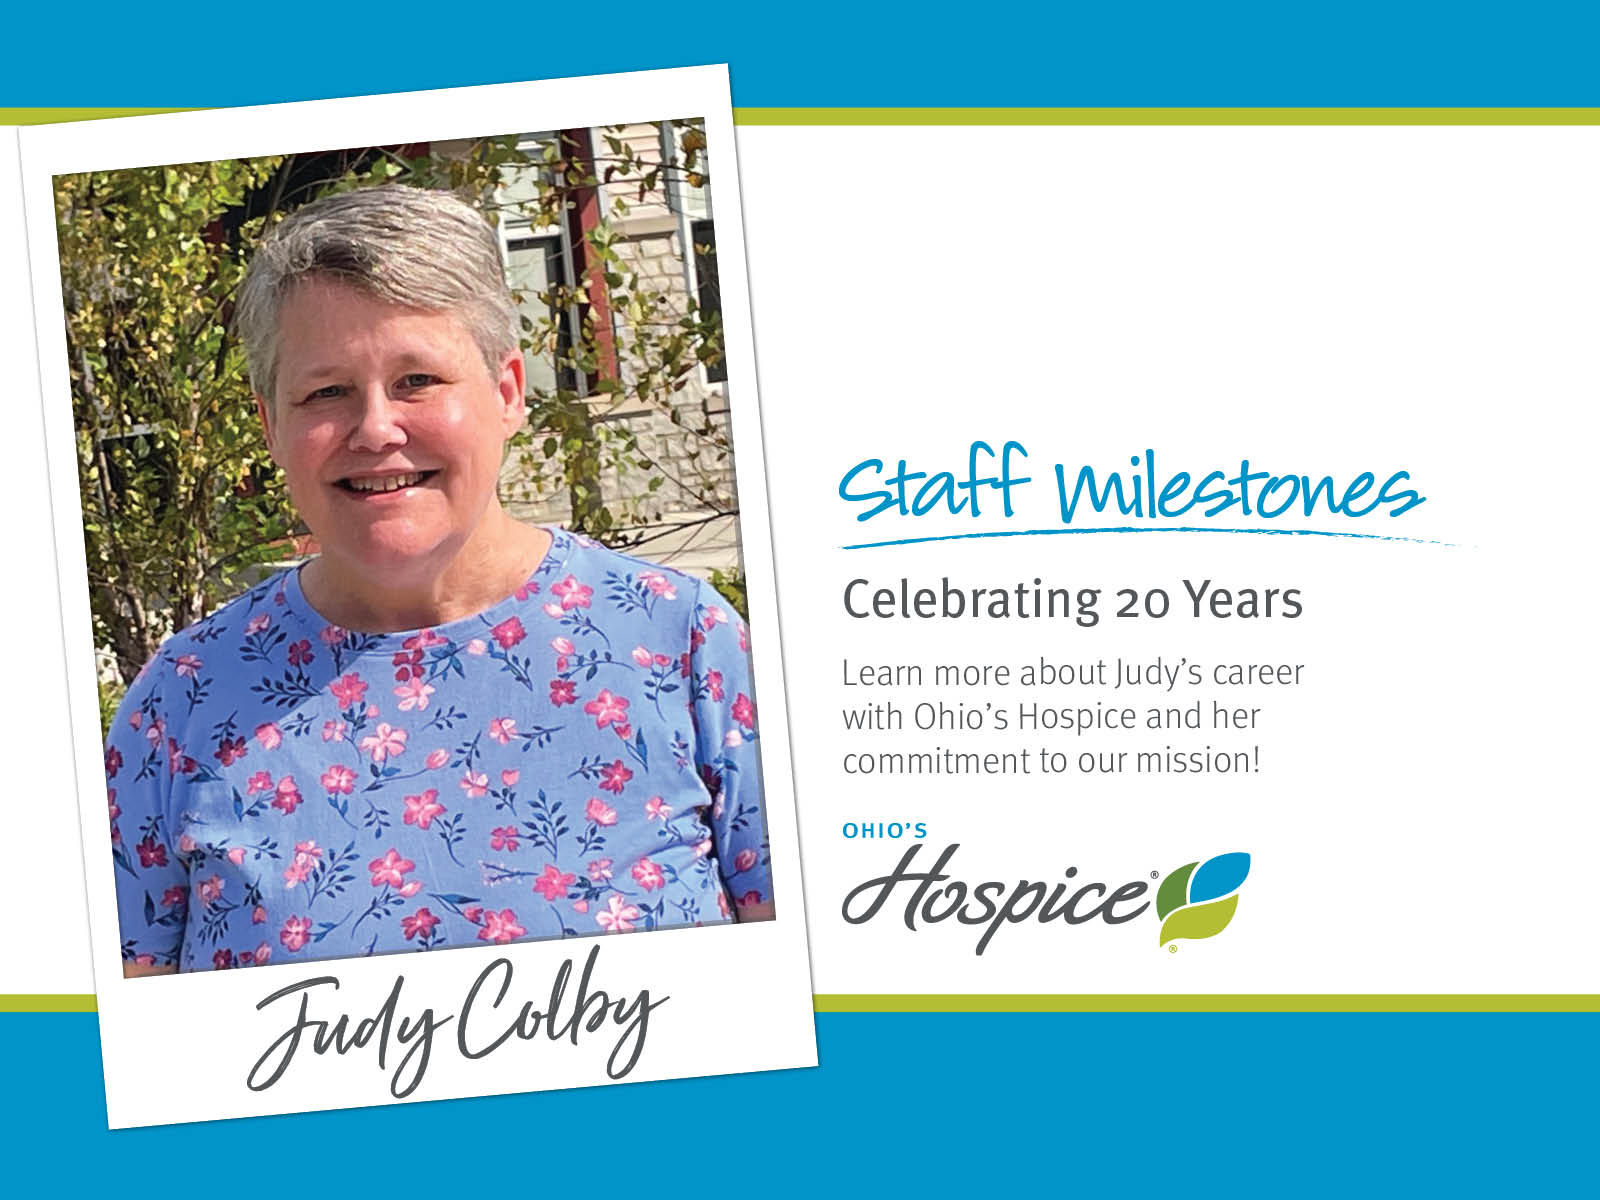 Staff Milestones. Celebrating 20 Years. Learn more about Judy Colby's career with Ohio's Hospice.